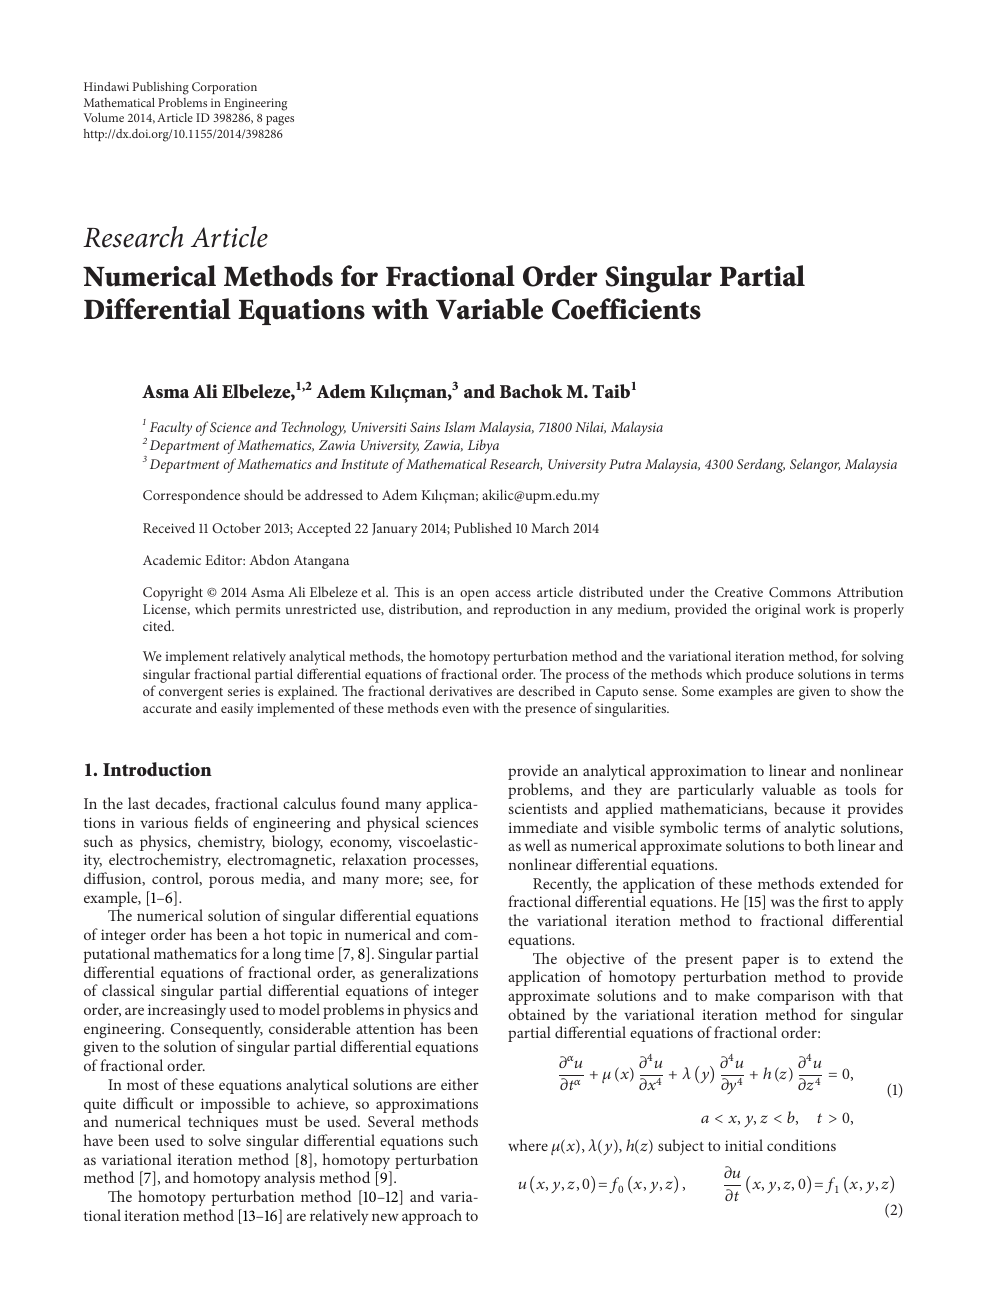 Numerical Methods For Fractional Order Singular Partial Differential Equations With Variable Coefficients Topic Of Research Paper In Mathematics Download Scholarly Article Pdf And Read For Free On Cyberleninka Open Science Hub